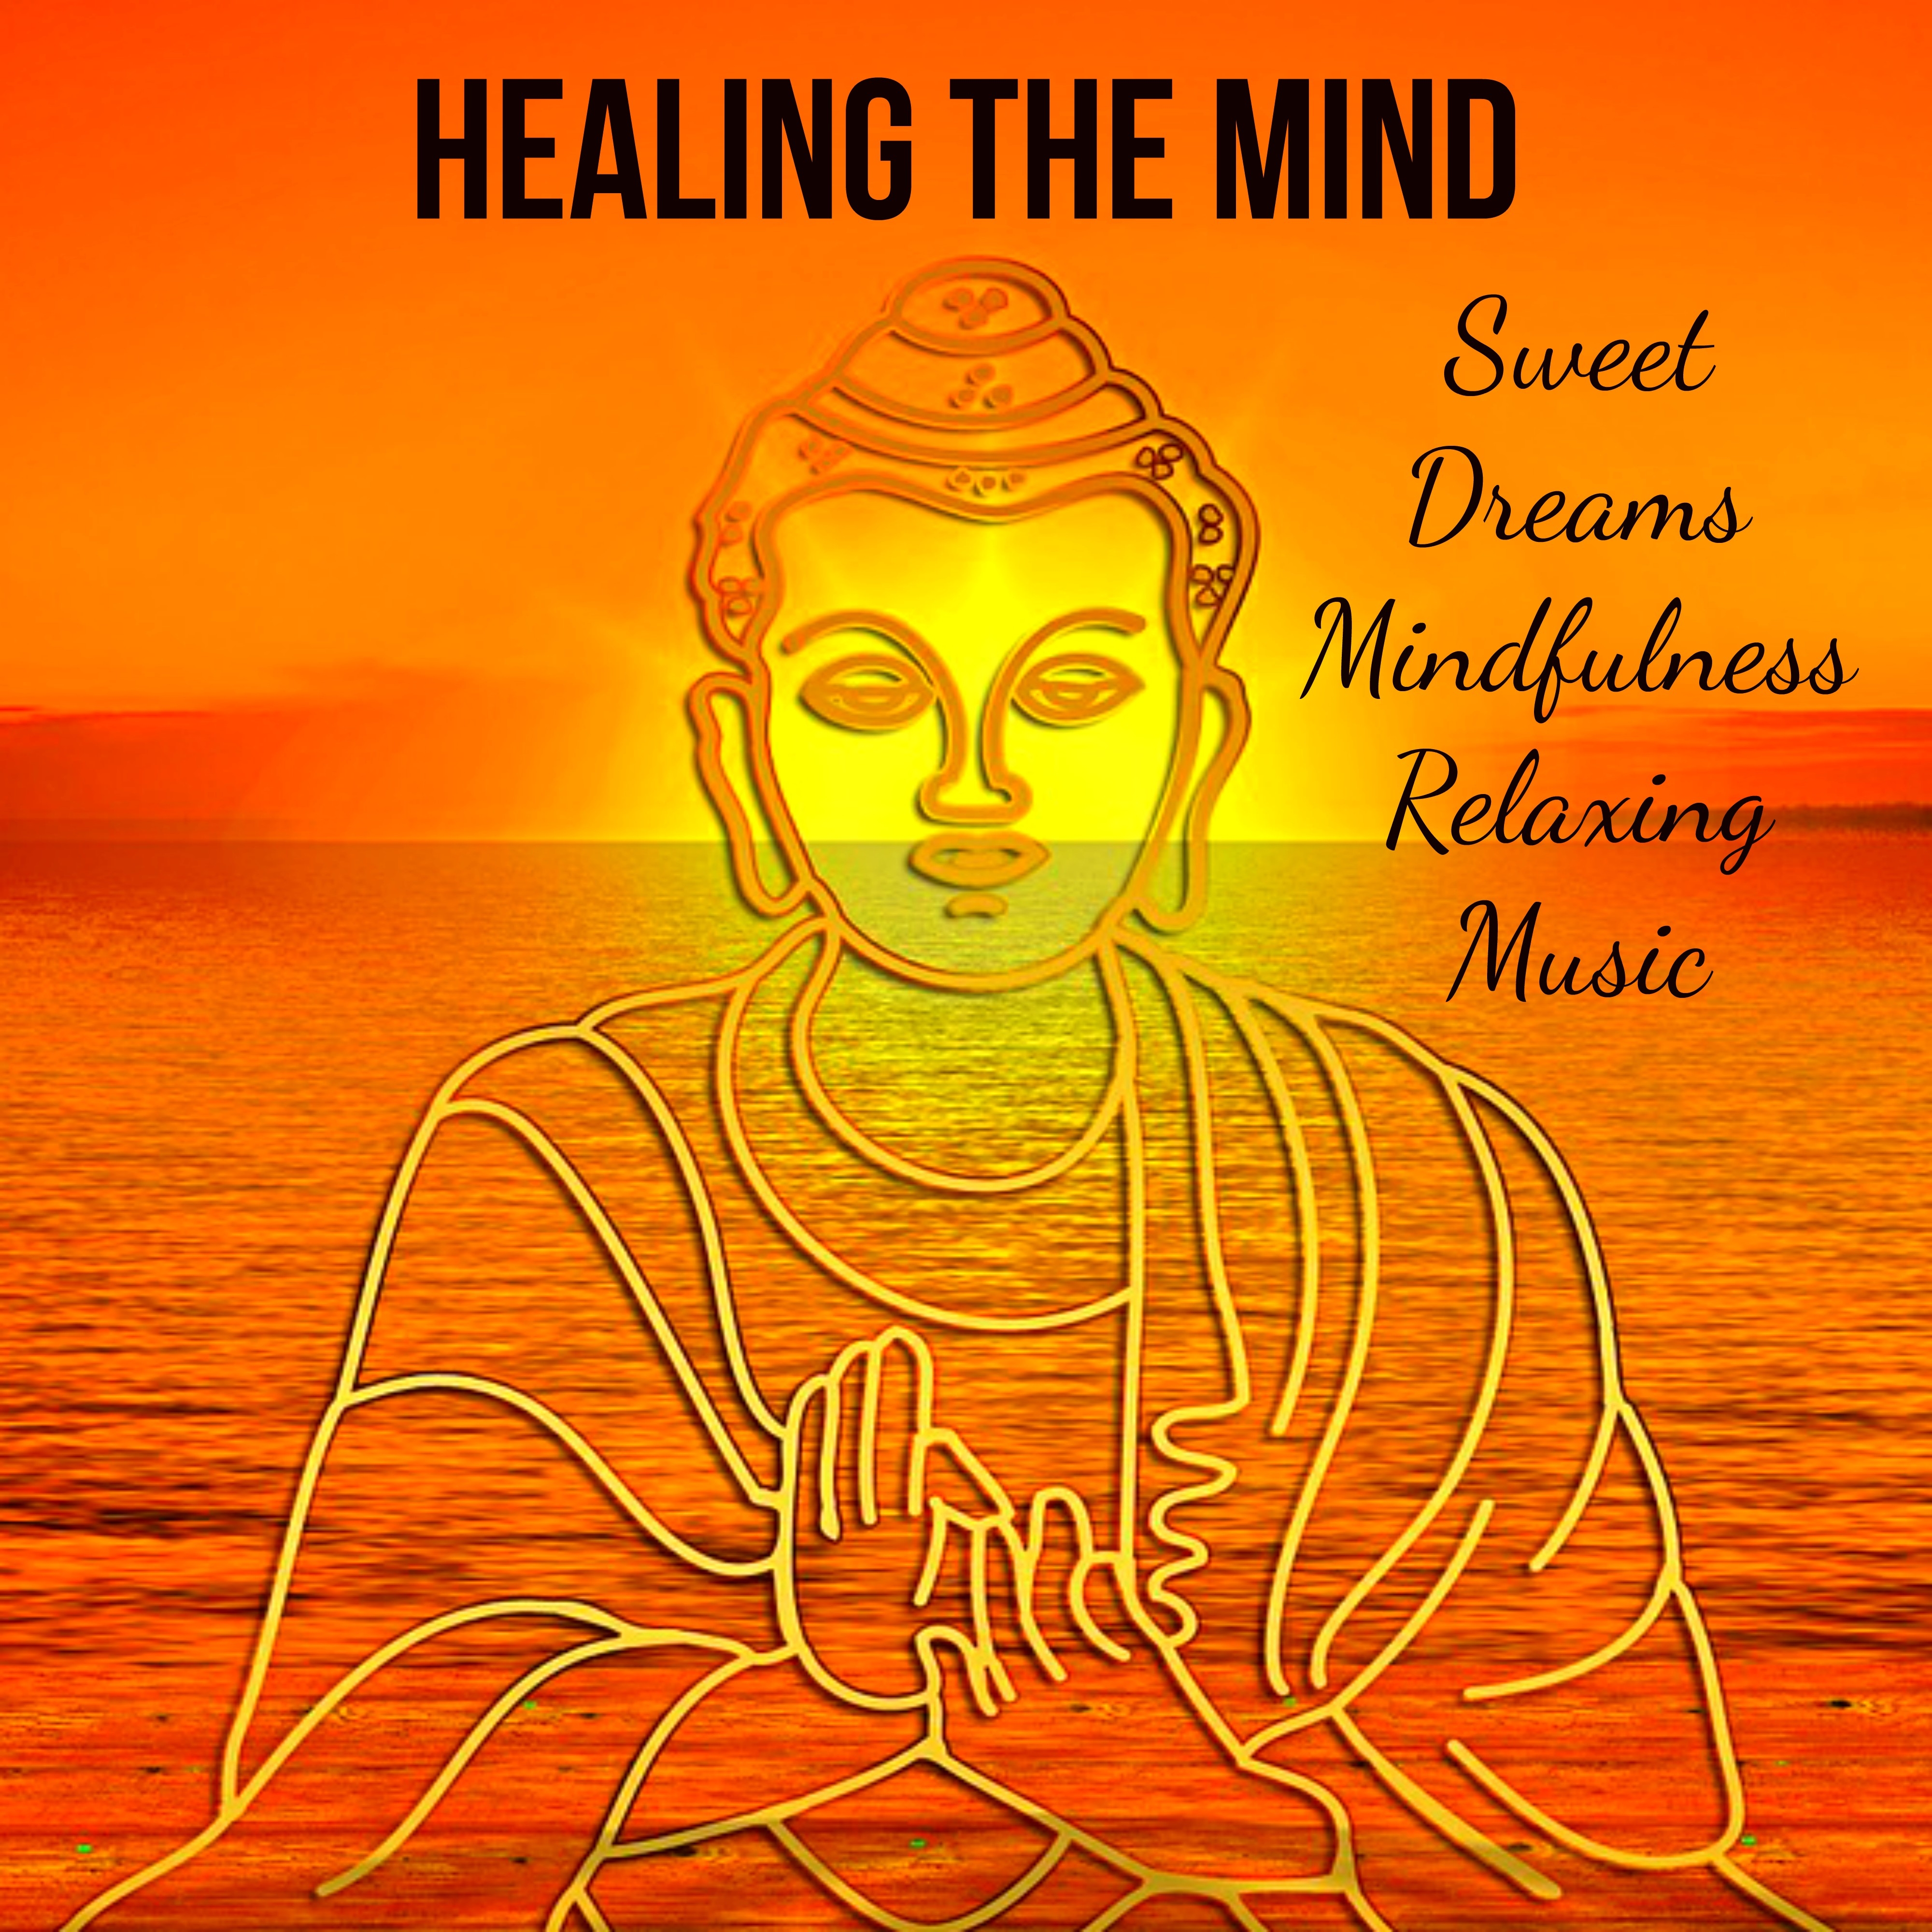 Healing The Mind - Sweet Dreams Mindfulness Relaxing Music for Deep Emotions Wellbeing Yoga Classes with Meditative Soothing Nature New Age Sounds